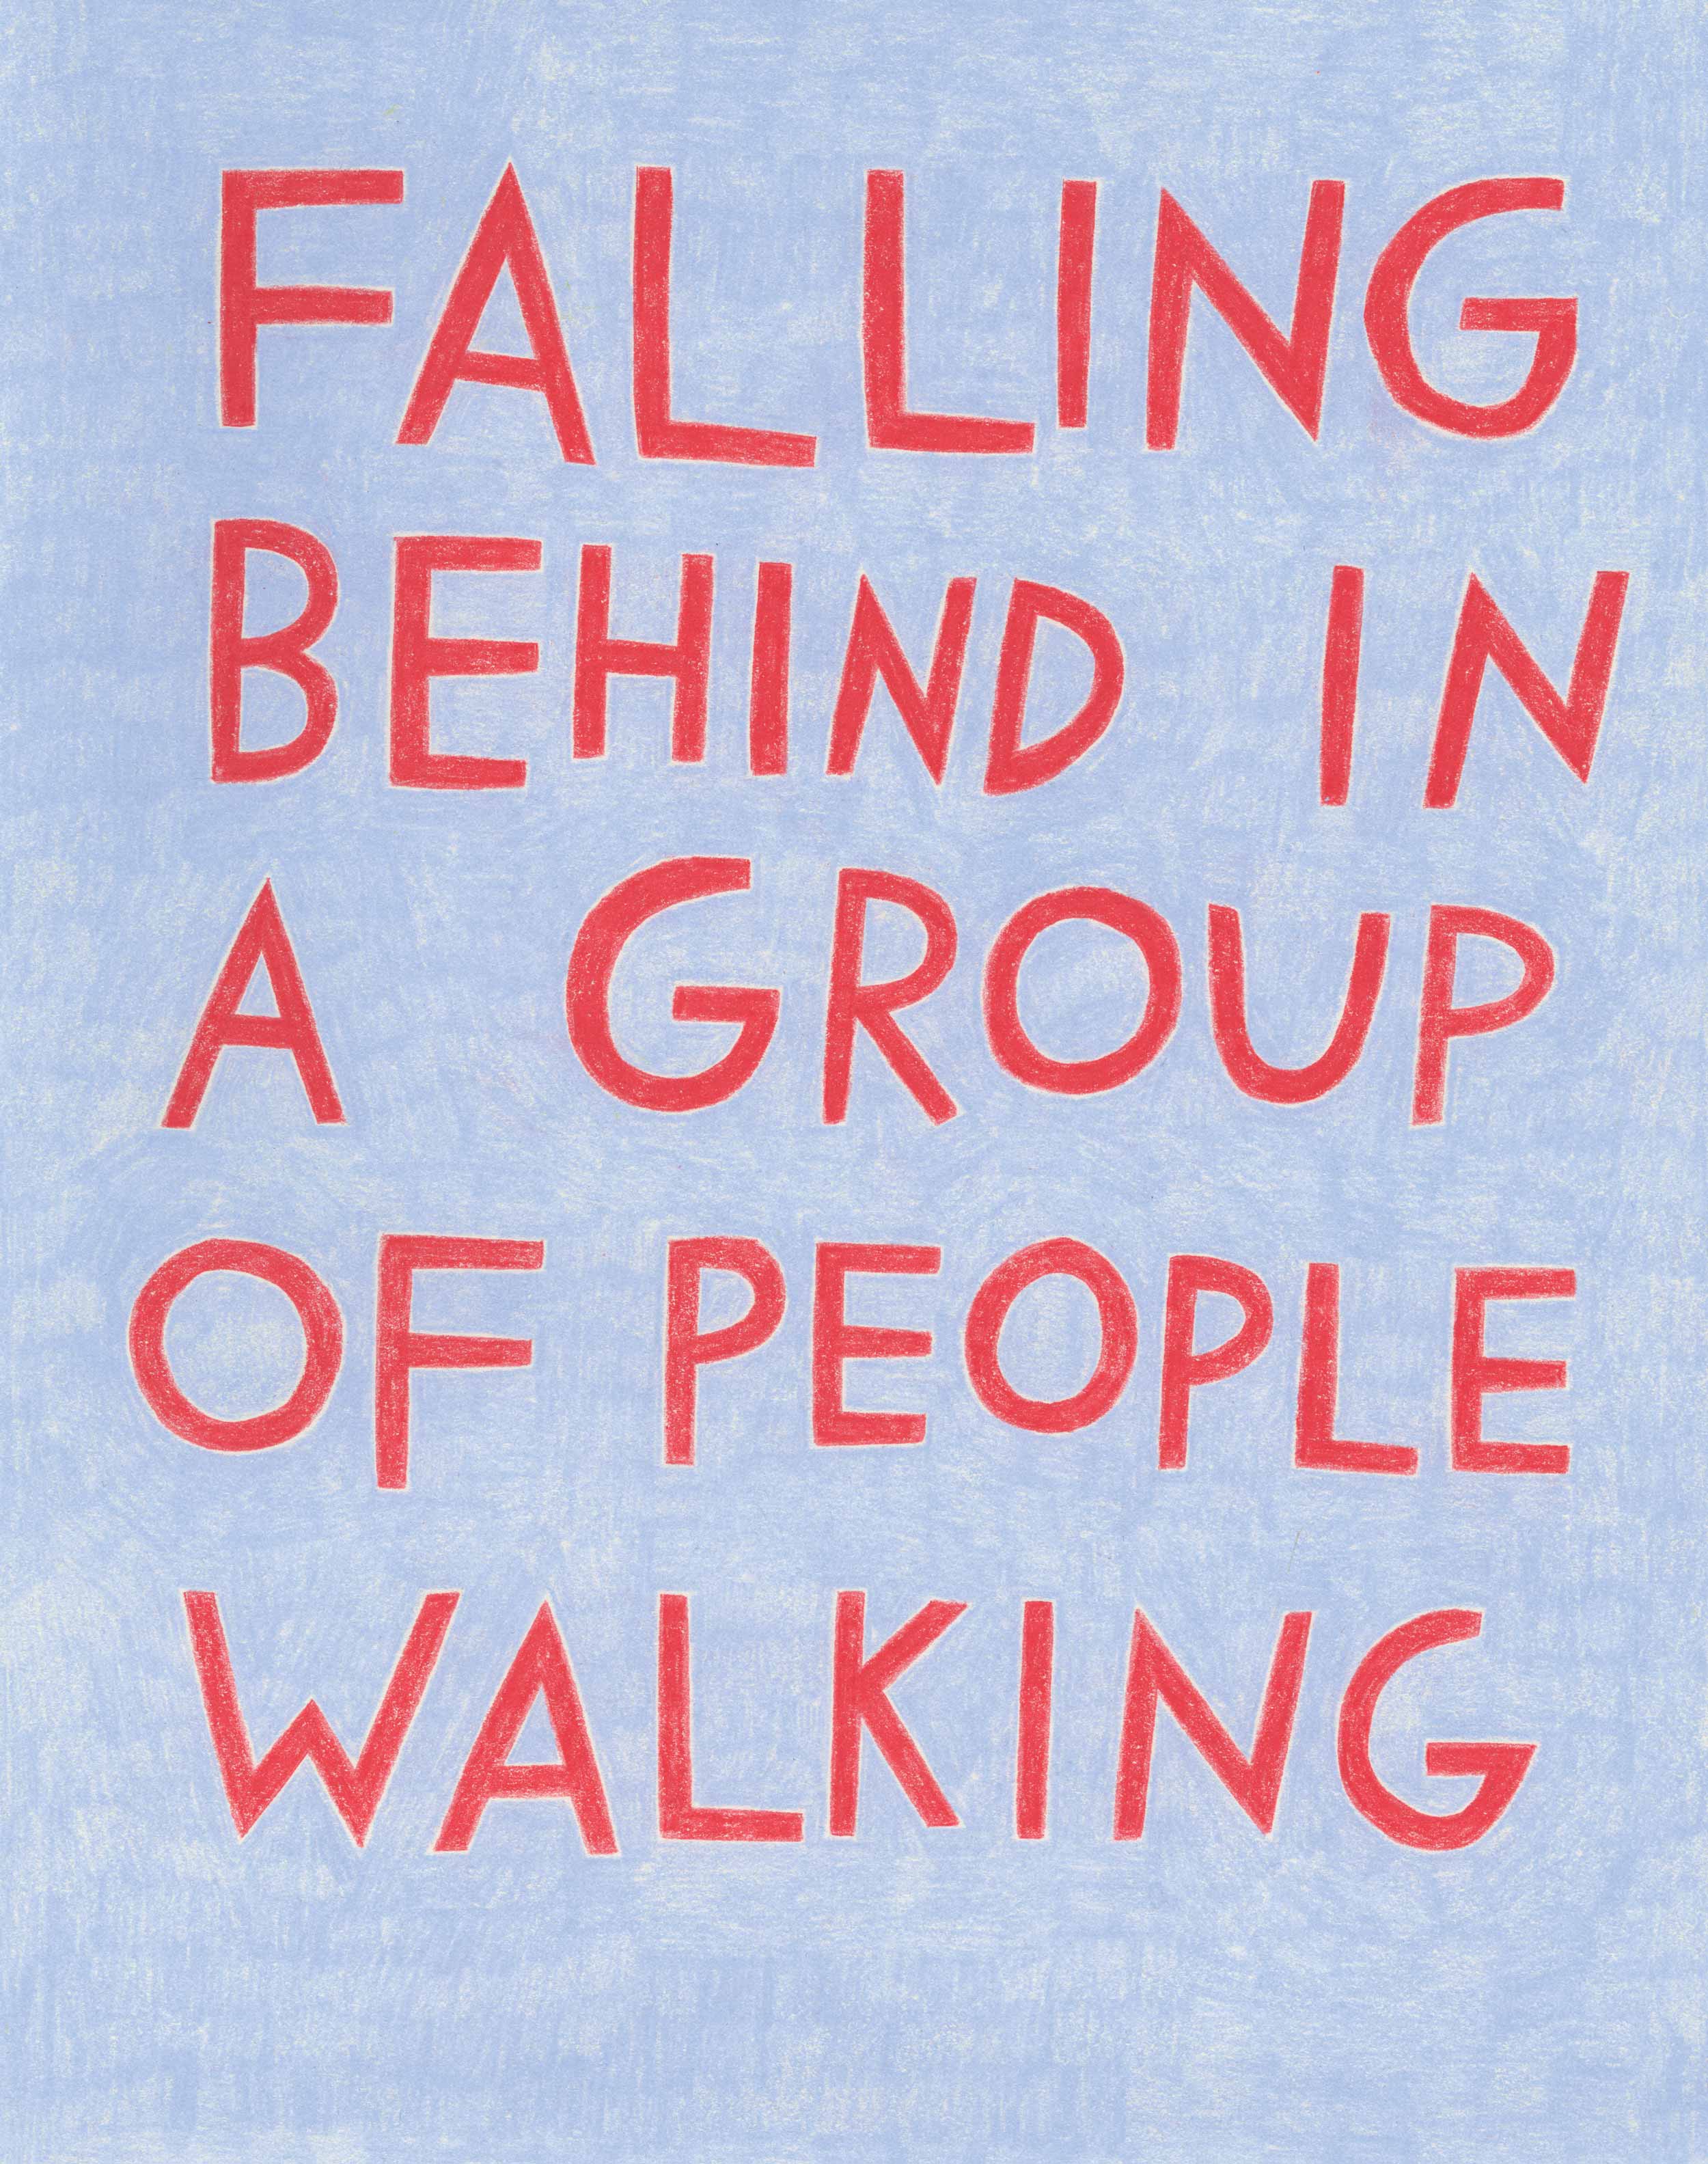 One of 18 unique colored pencil drawings that are a part of Shannon's Self-Portrait project. Each drawing is of a short piece of text. This one specifically reads, “Falling Behind in a Group of People Walking” in orange on a dusty blue slightly patterned background.